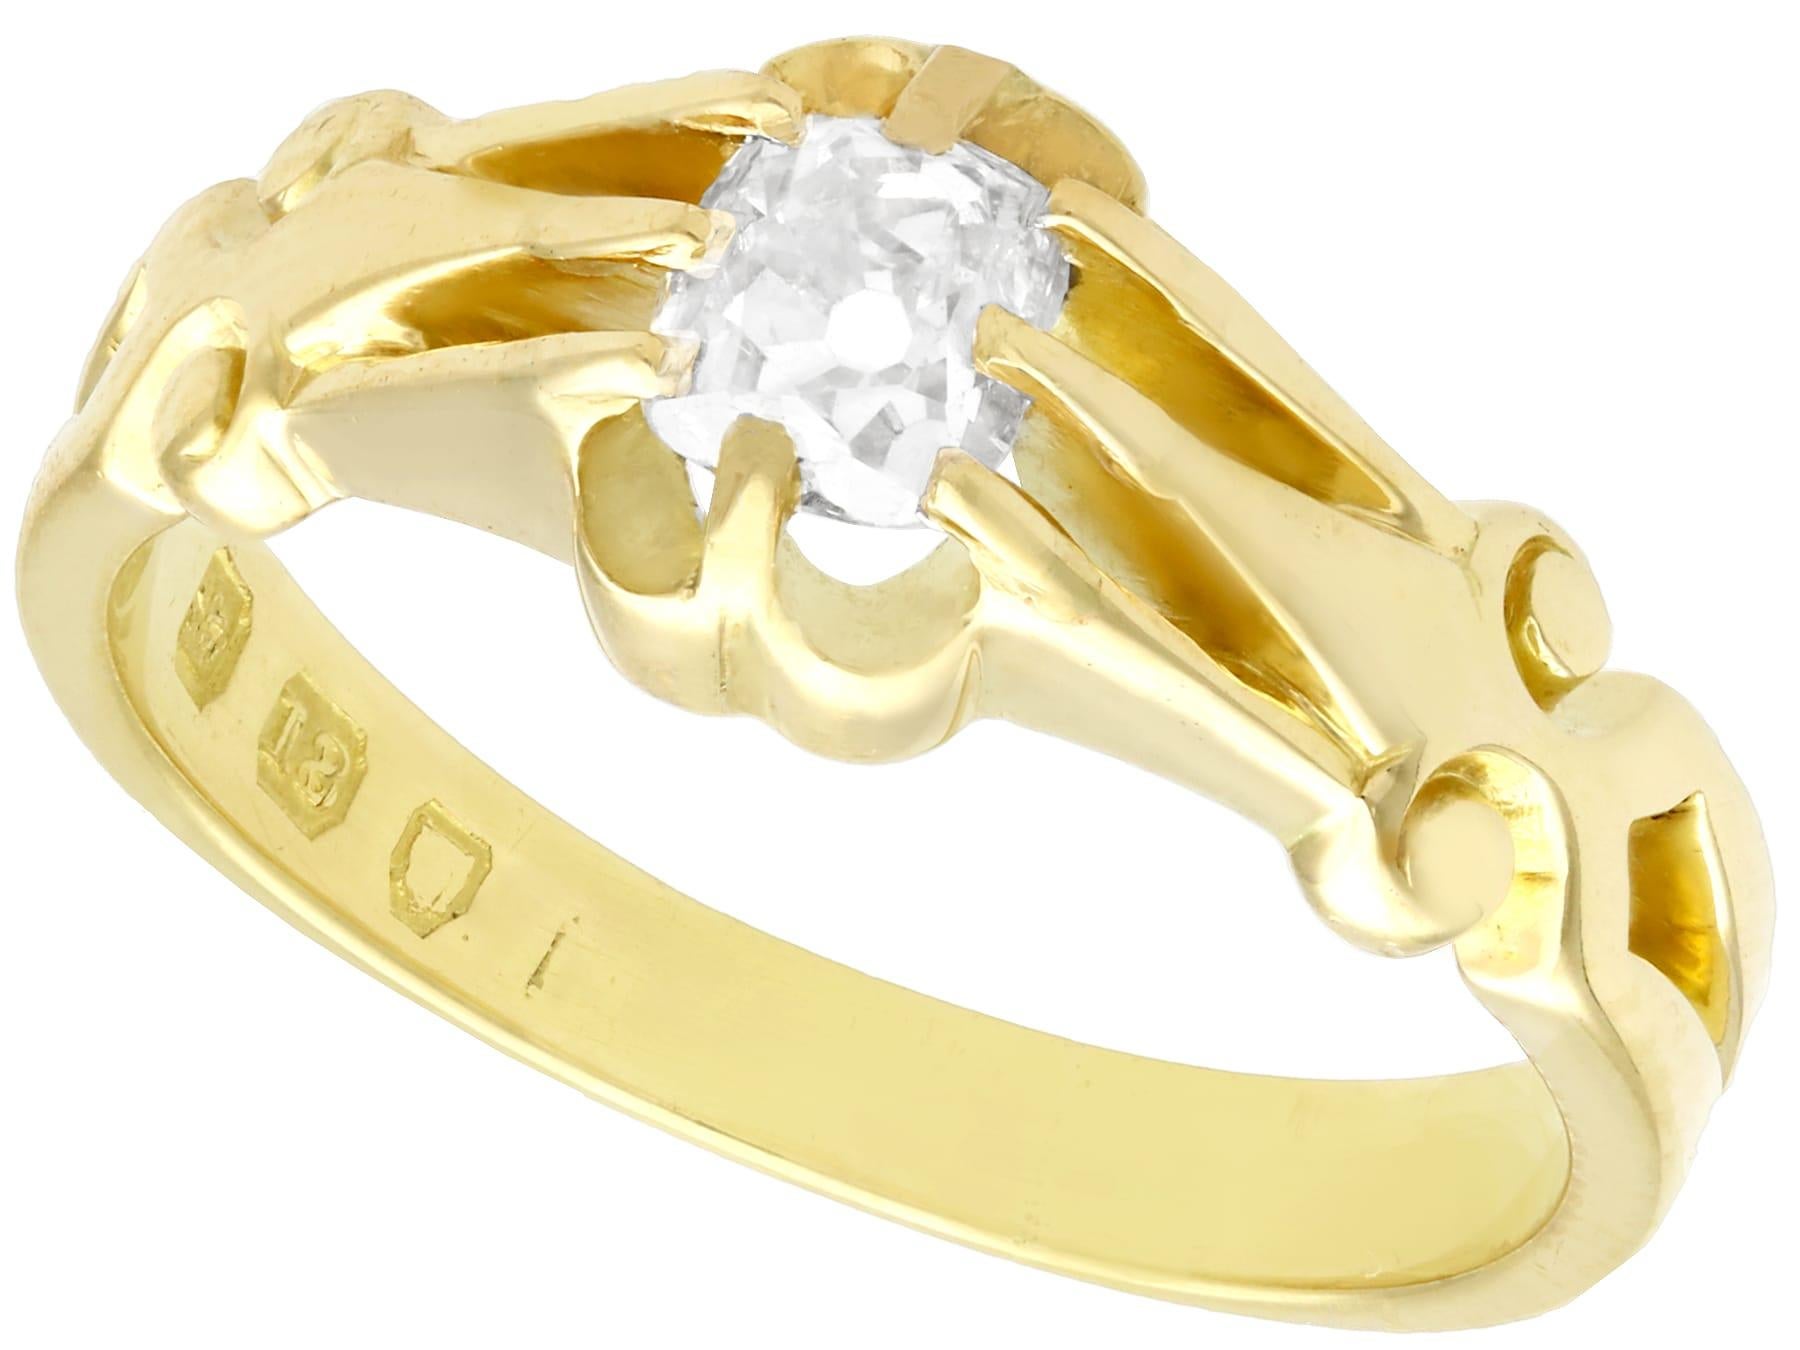 Antique Diamond and 18K Yellow Gold Solitaire Ring